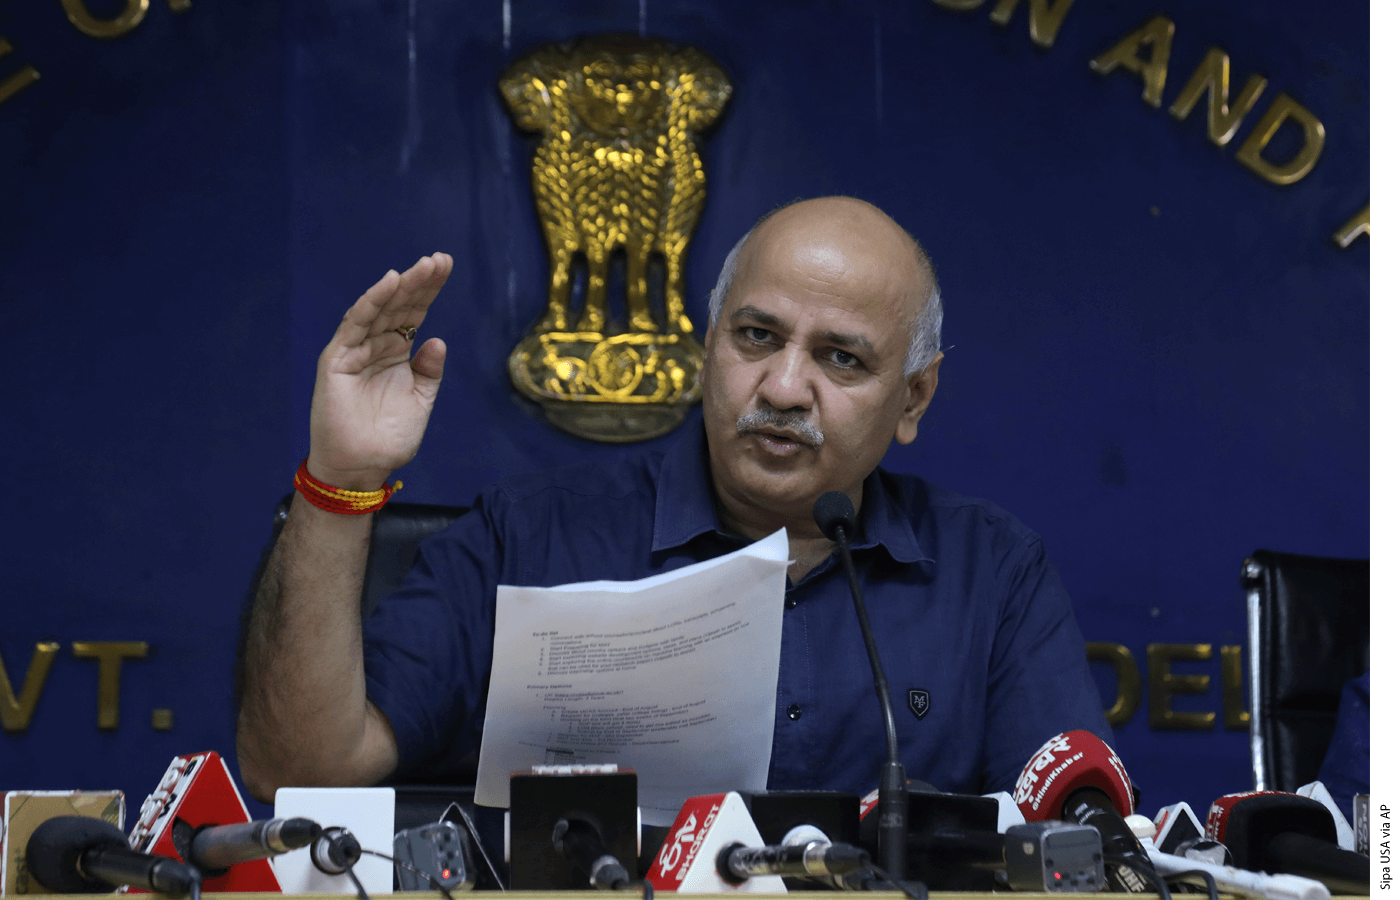 Delhi's Deputy Chief Minister and Education Minister, Manish Sisodia seen during a press conference on the eve of Teachers Day at Delhi Secretariat, in New Delhi, September 4, 2021.